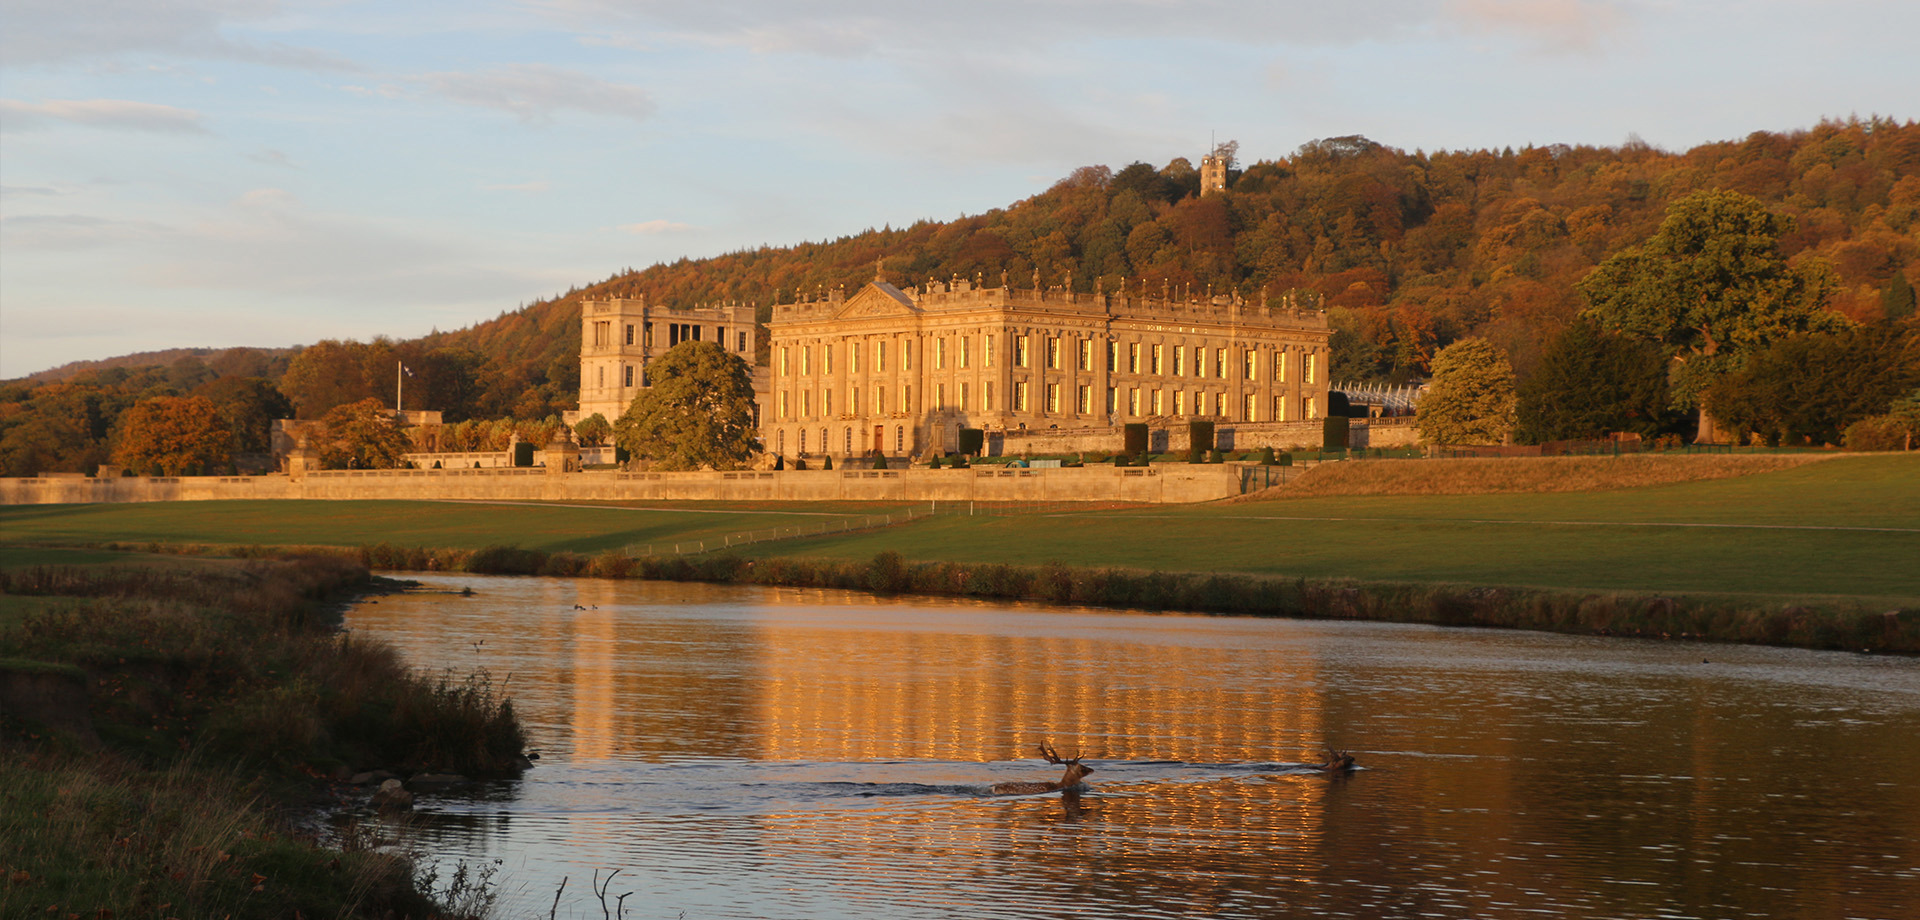 About Chatsworth